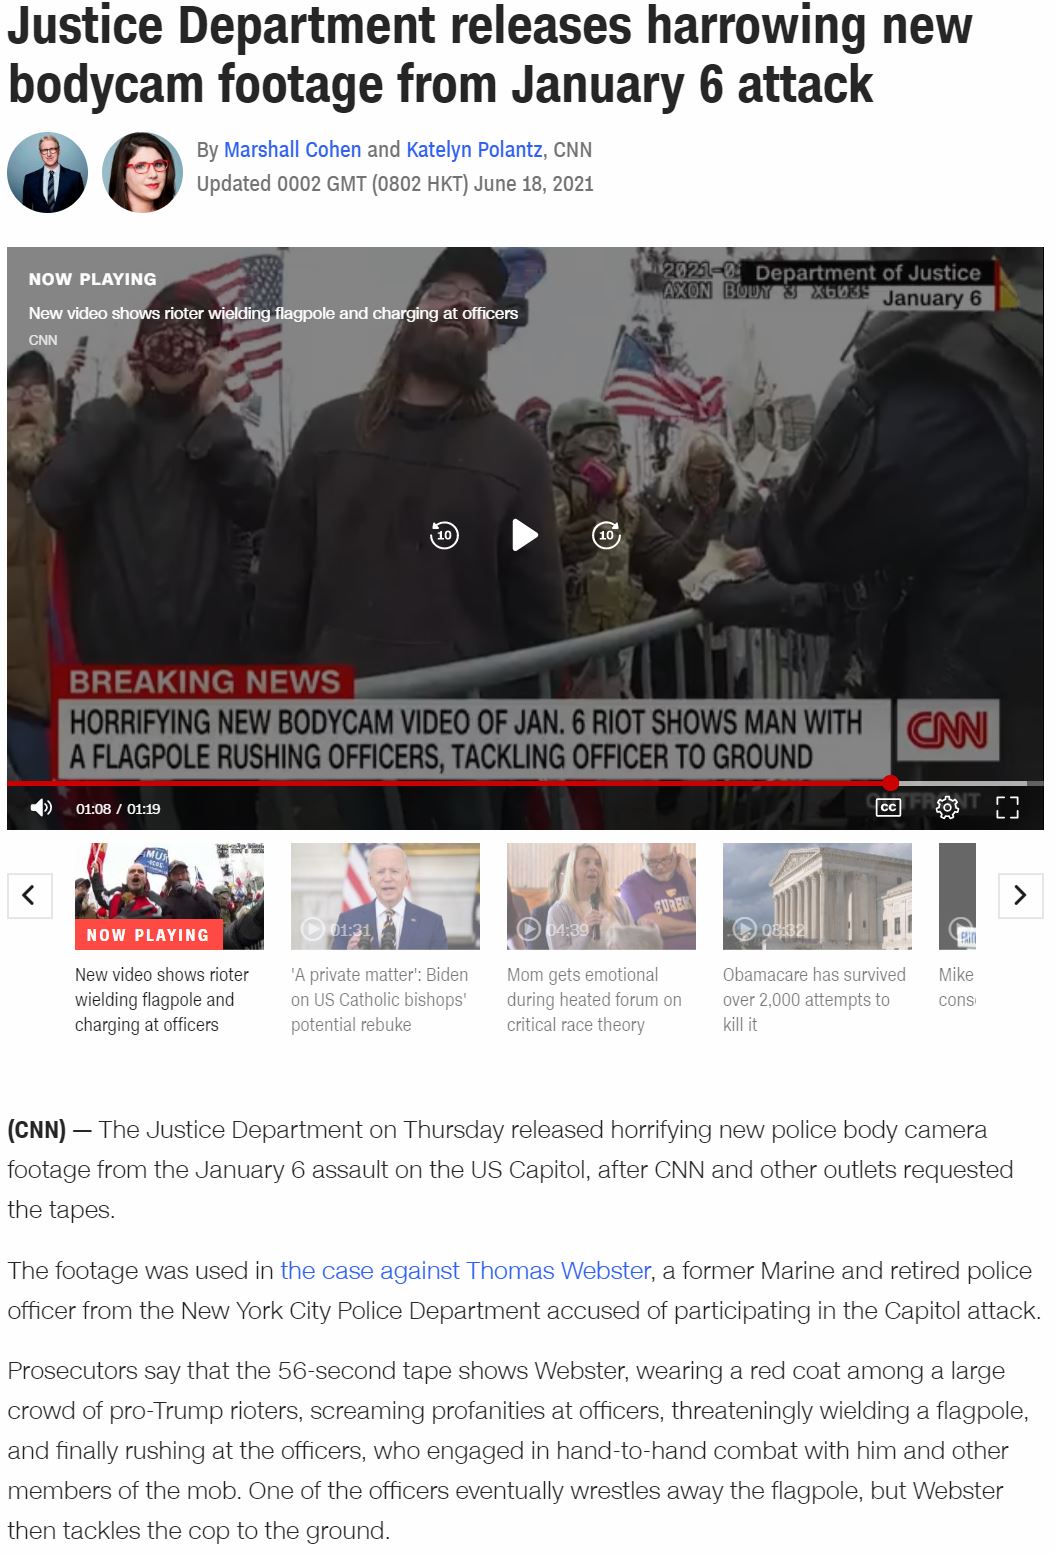 Staged Attack on US Capitol